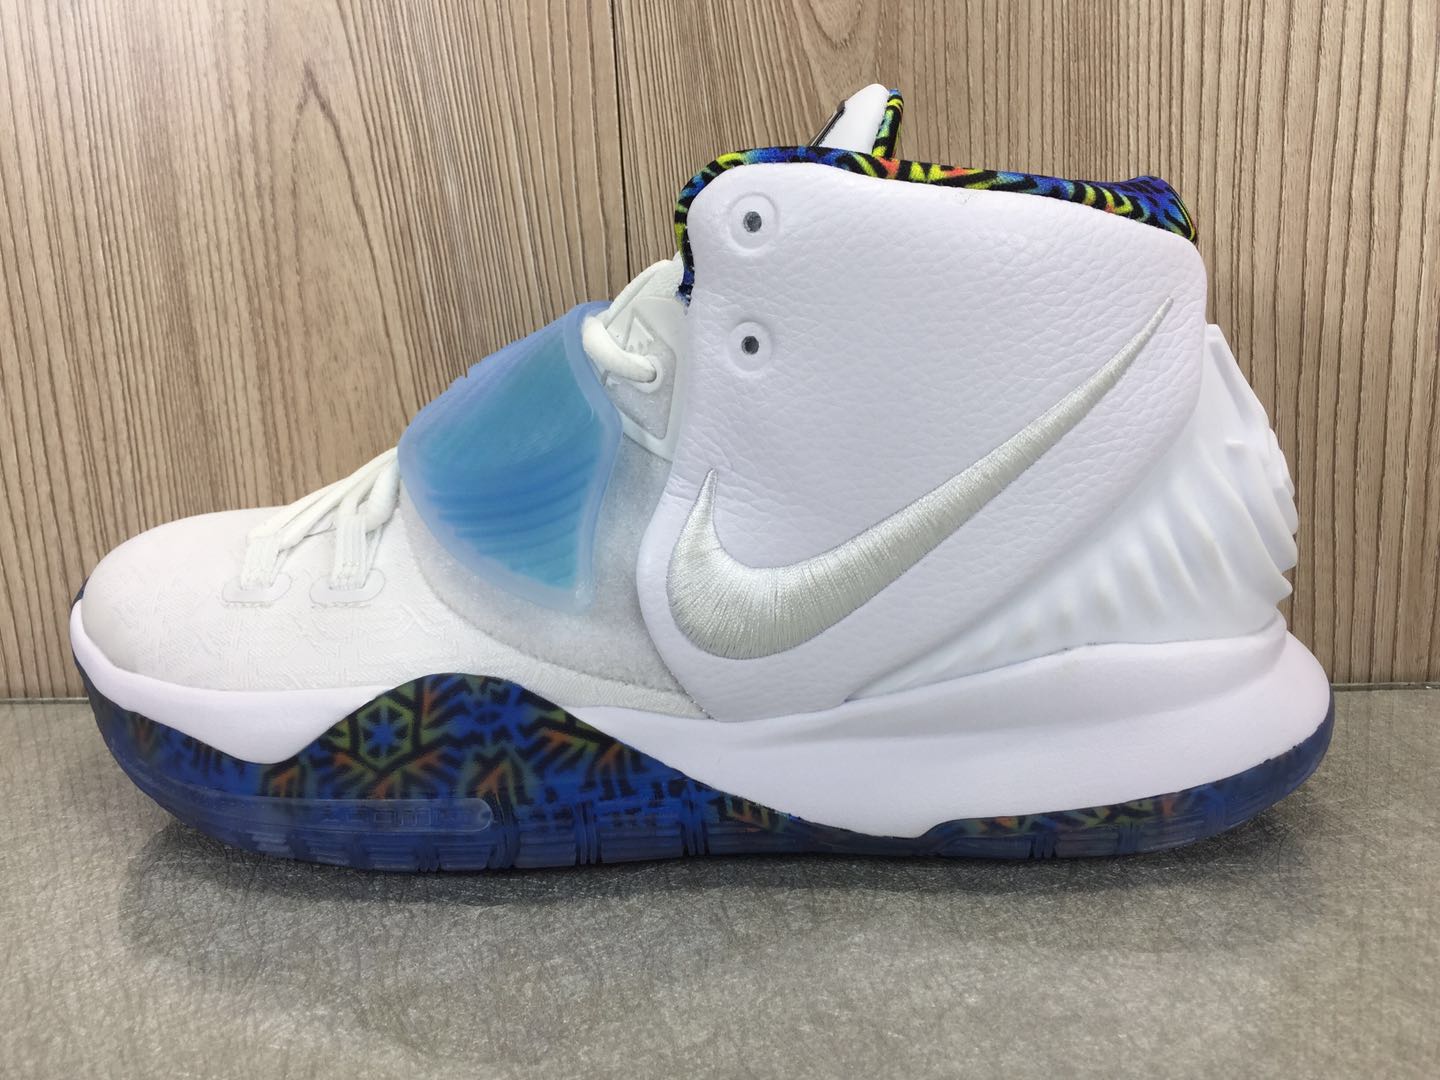 2020 Nike Kyrie Irving 6 White Colorful Blue Shoes For Women